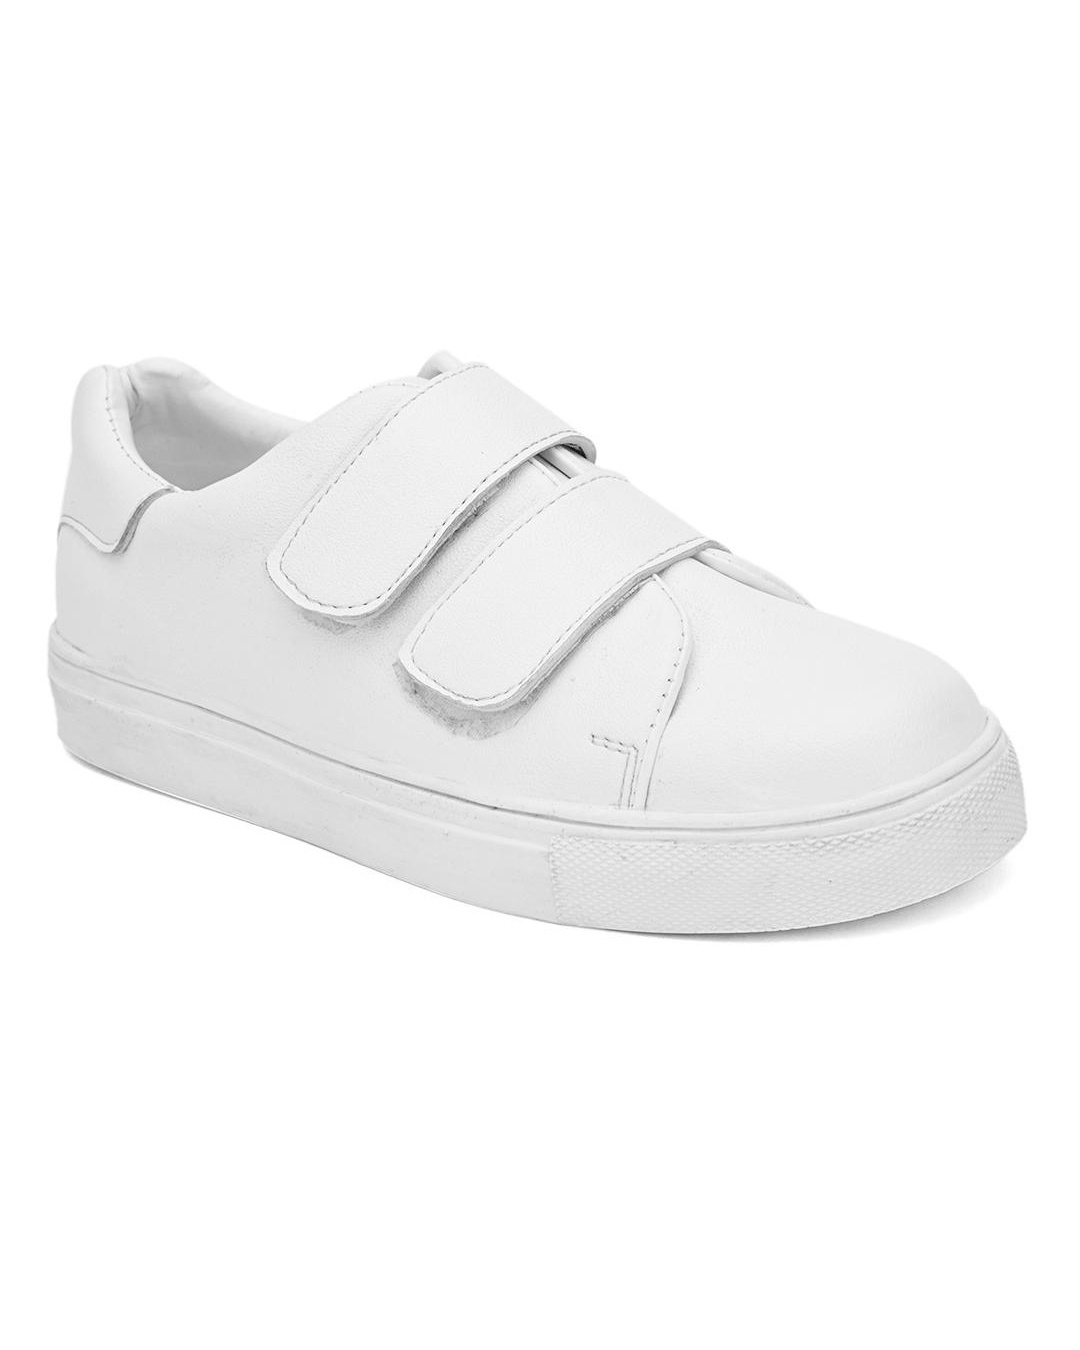 Buy Women's White Velcro Casual Shoes Online in India at Bewakoof